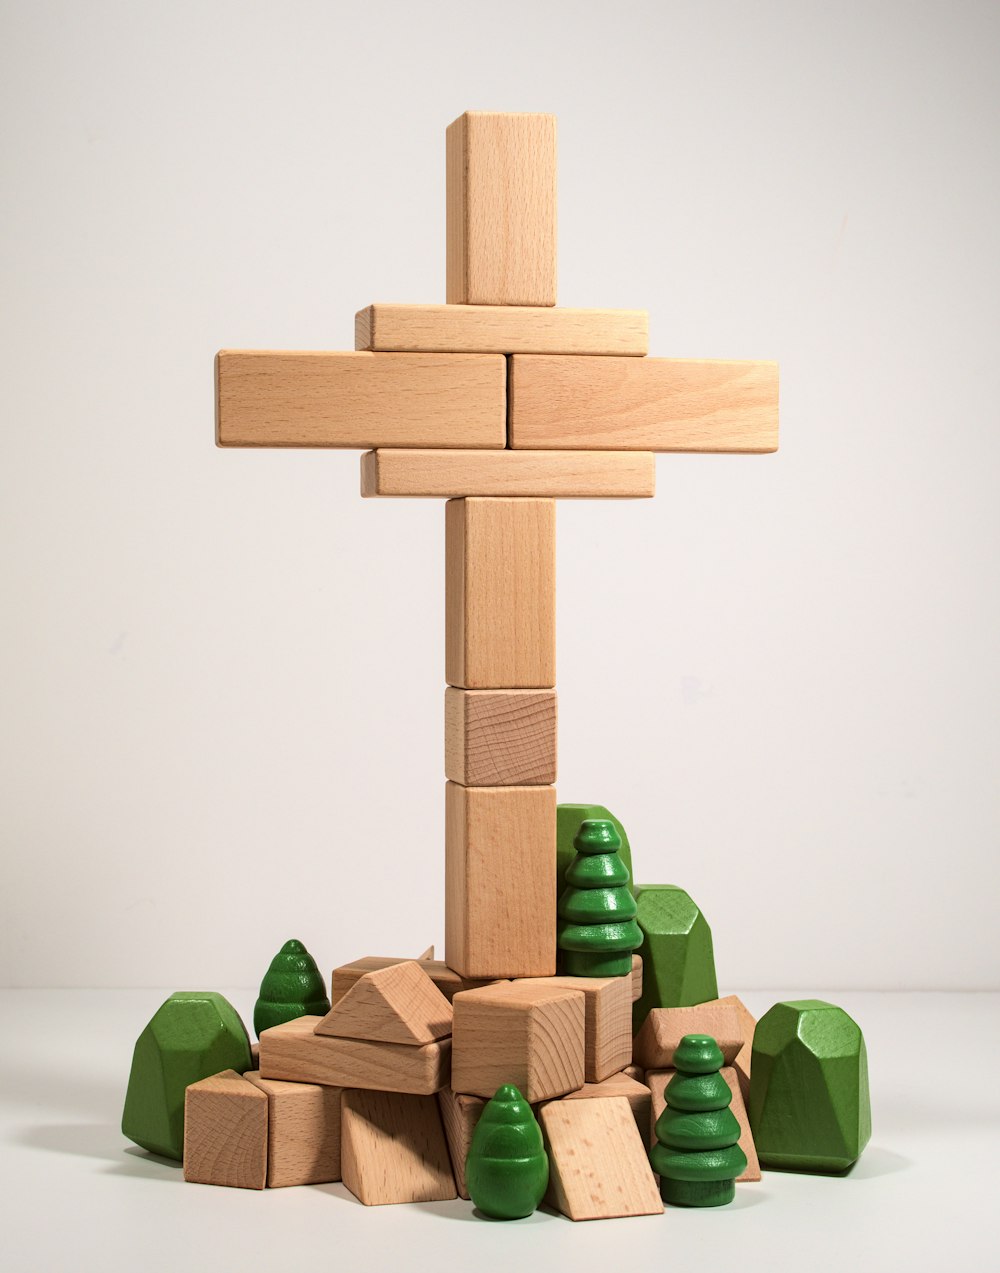 a wooden cross surrounded by blocks and trees